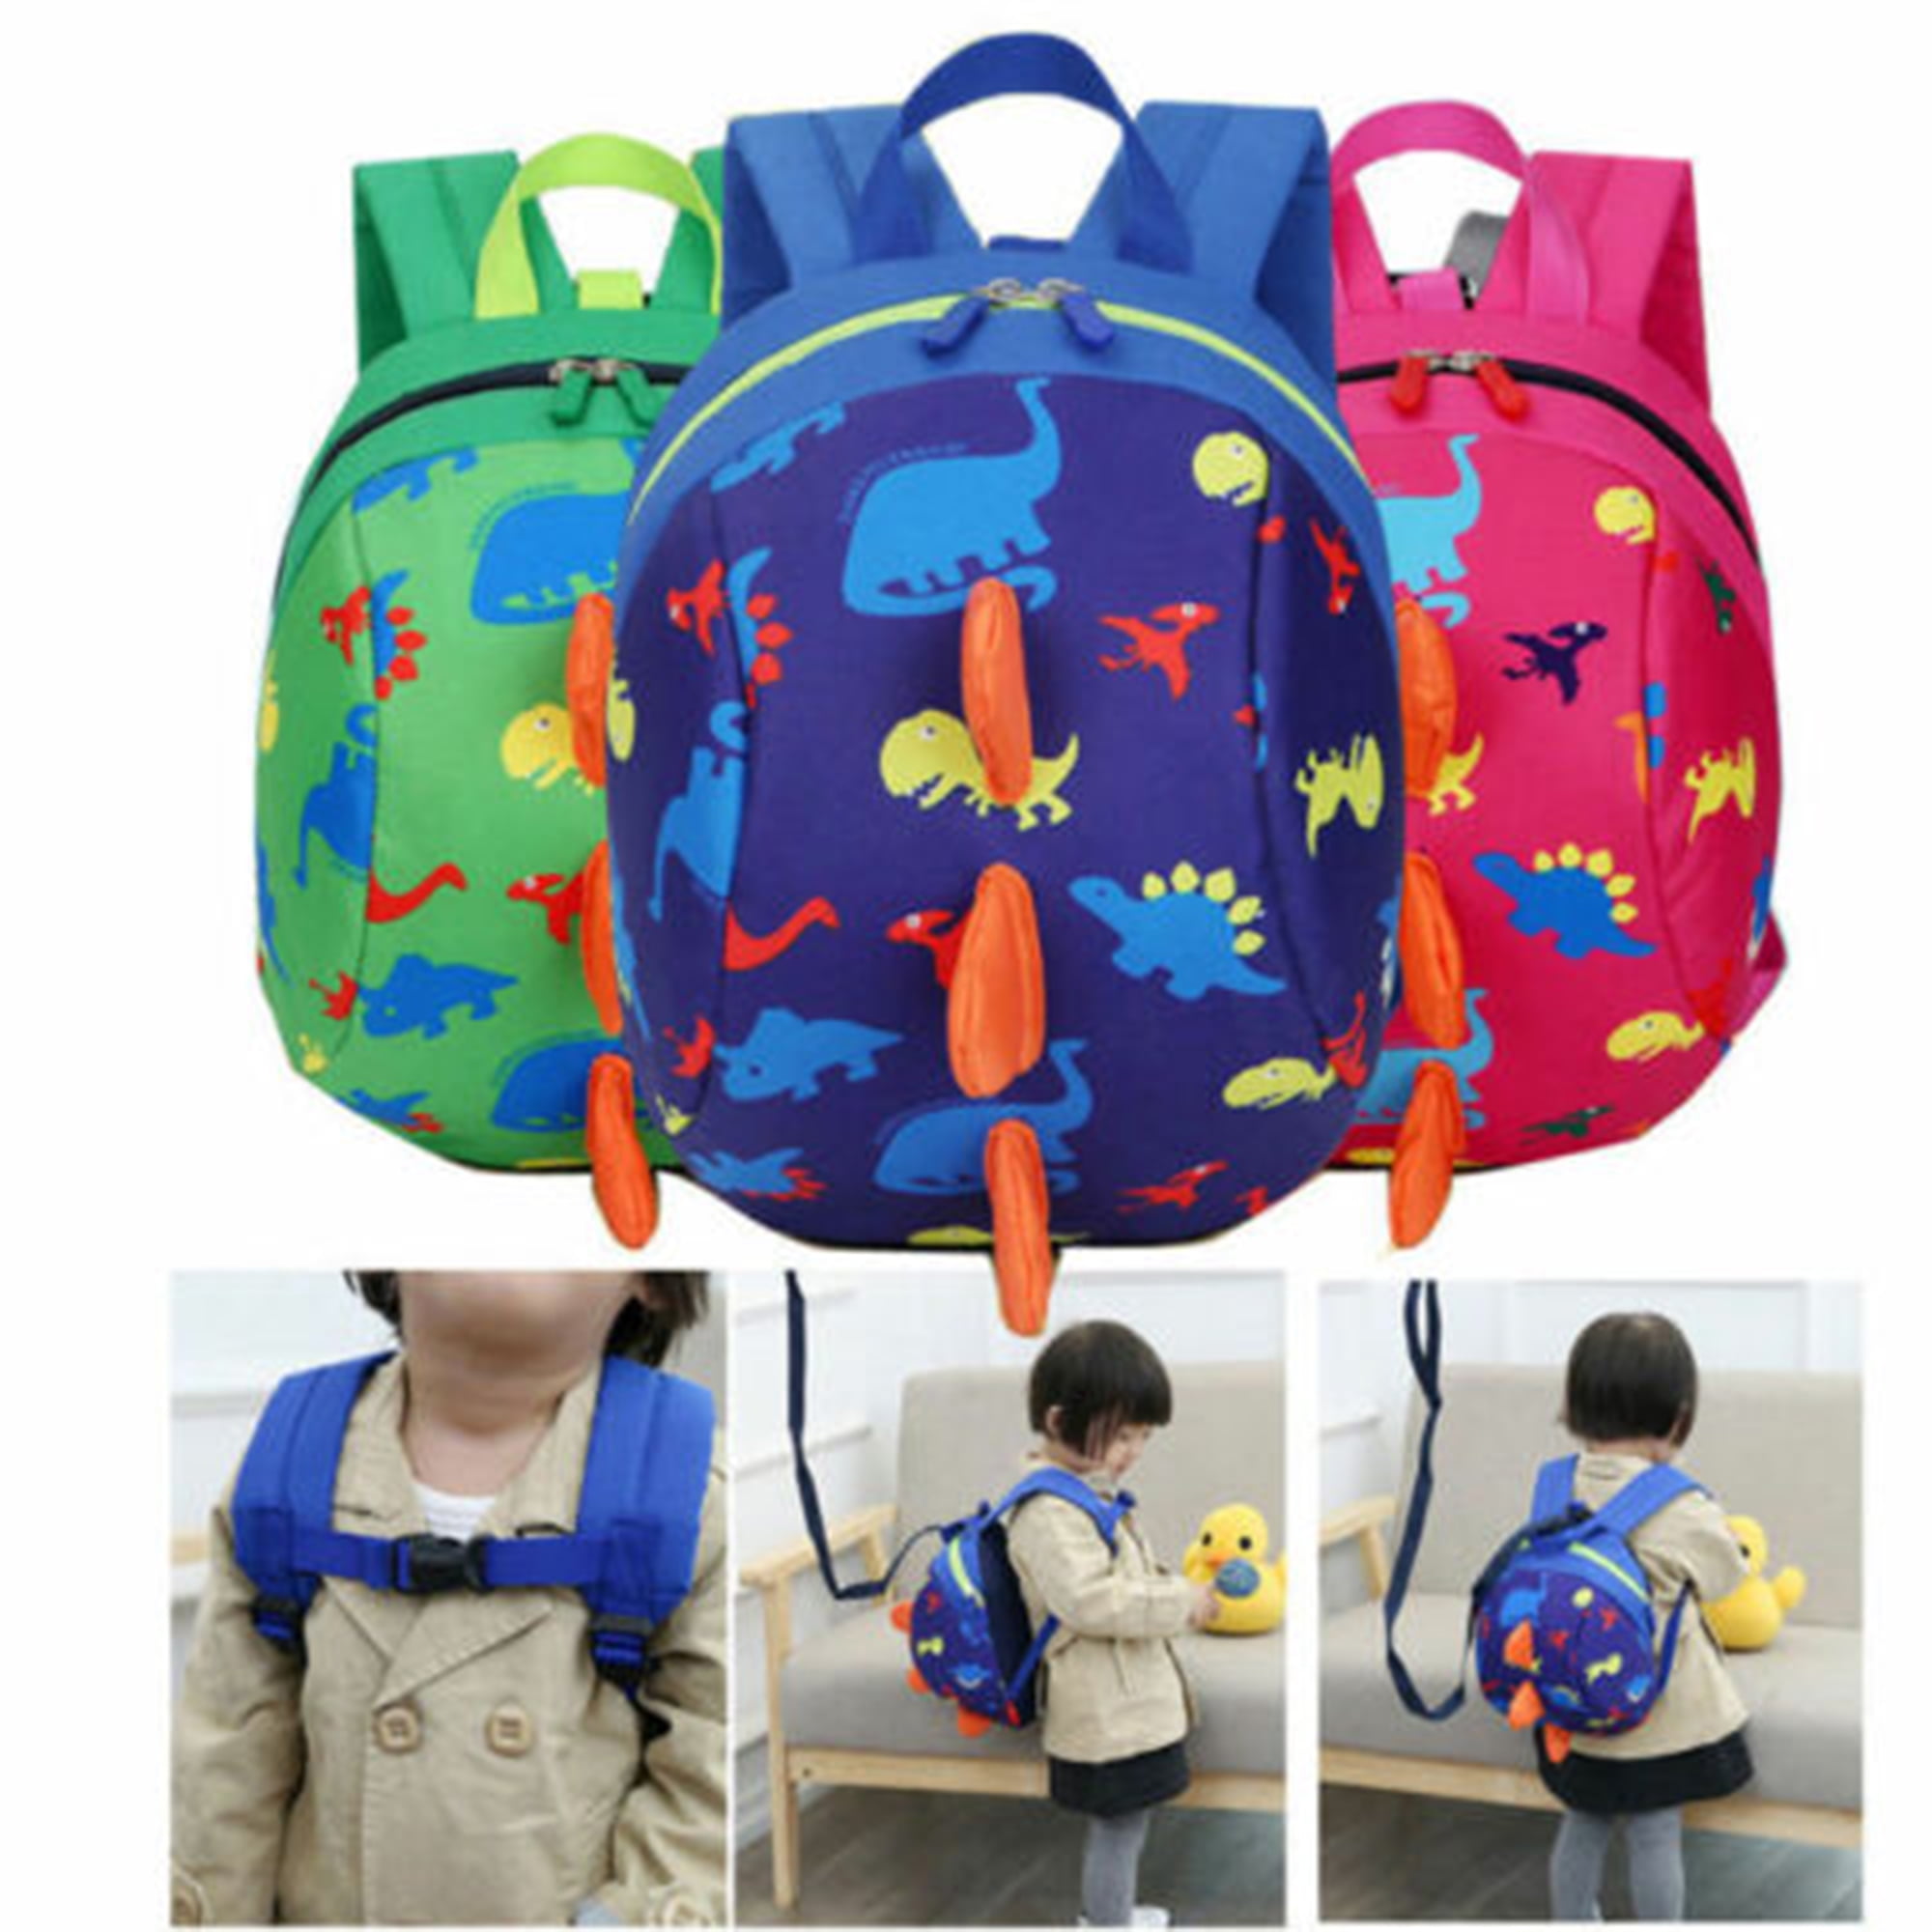 Bing Boys Girls 3D Ears Bunny Backpack With Reins Kids Detachable Safety  Harness Toddlers Nursery Bag Infants Mini Rucksack : : Fashion